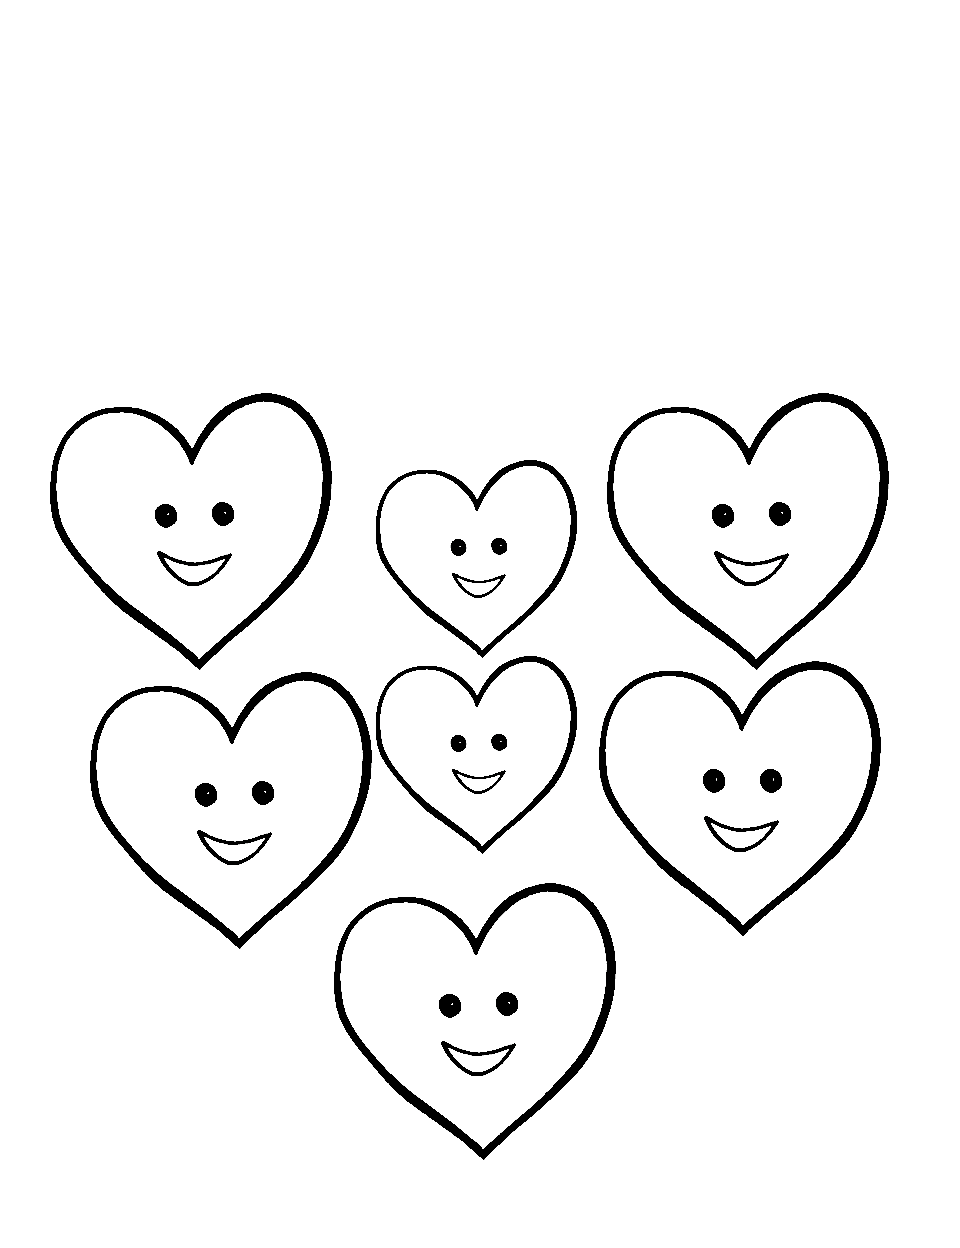 Happy Heart Parade Coloring Page - Rows of smiling hearts marching together, slowly forming a big heart together.